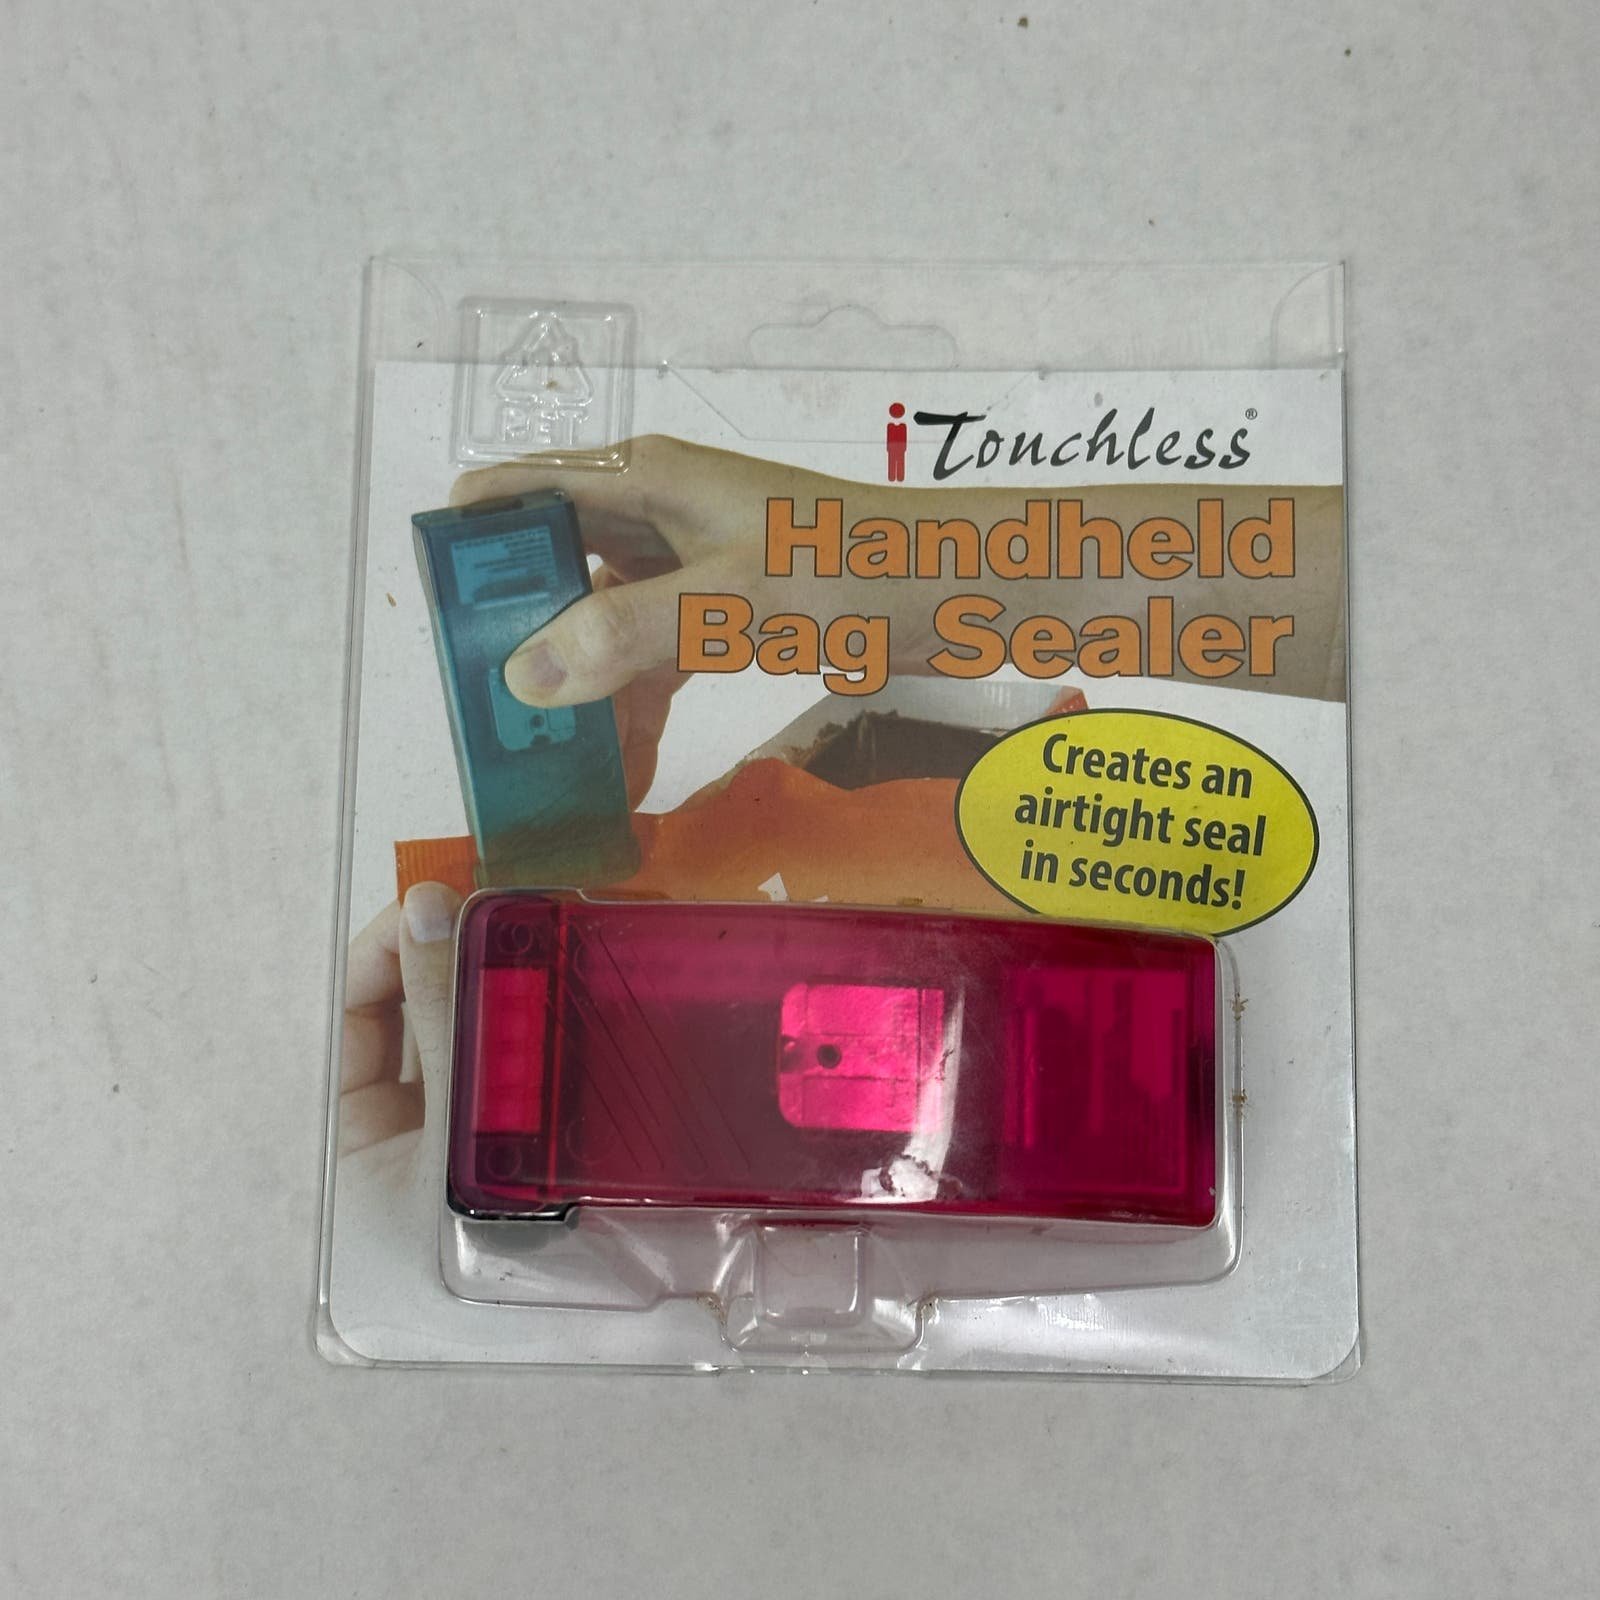 Pink itouchless Handheld Bag Sealer  New in package FUg